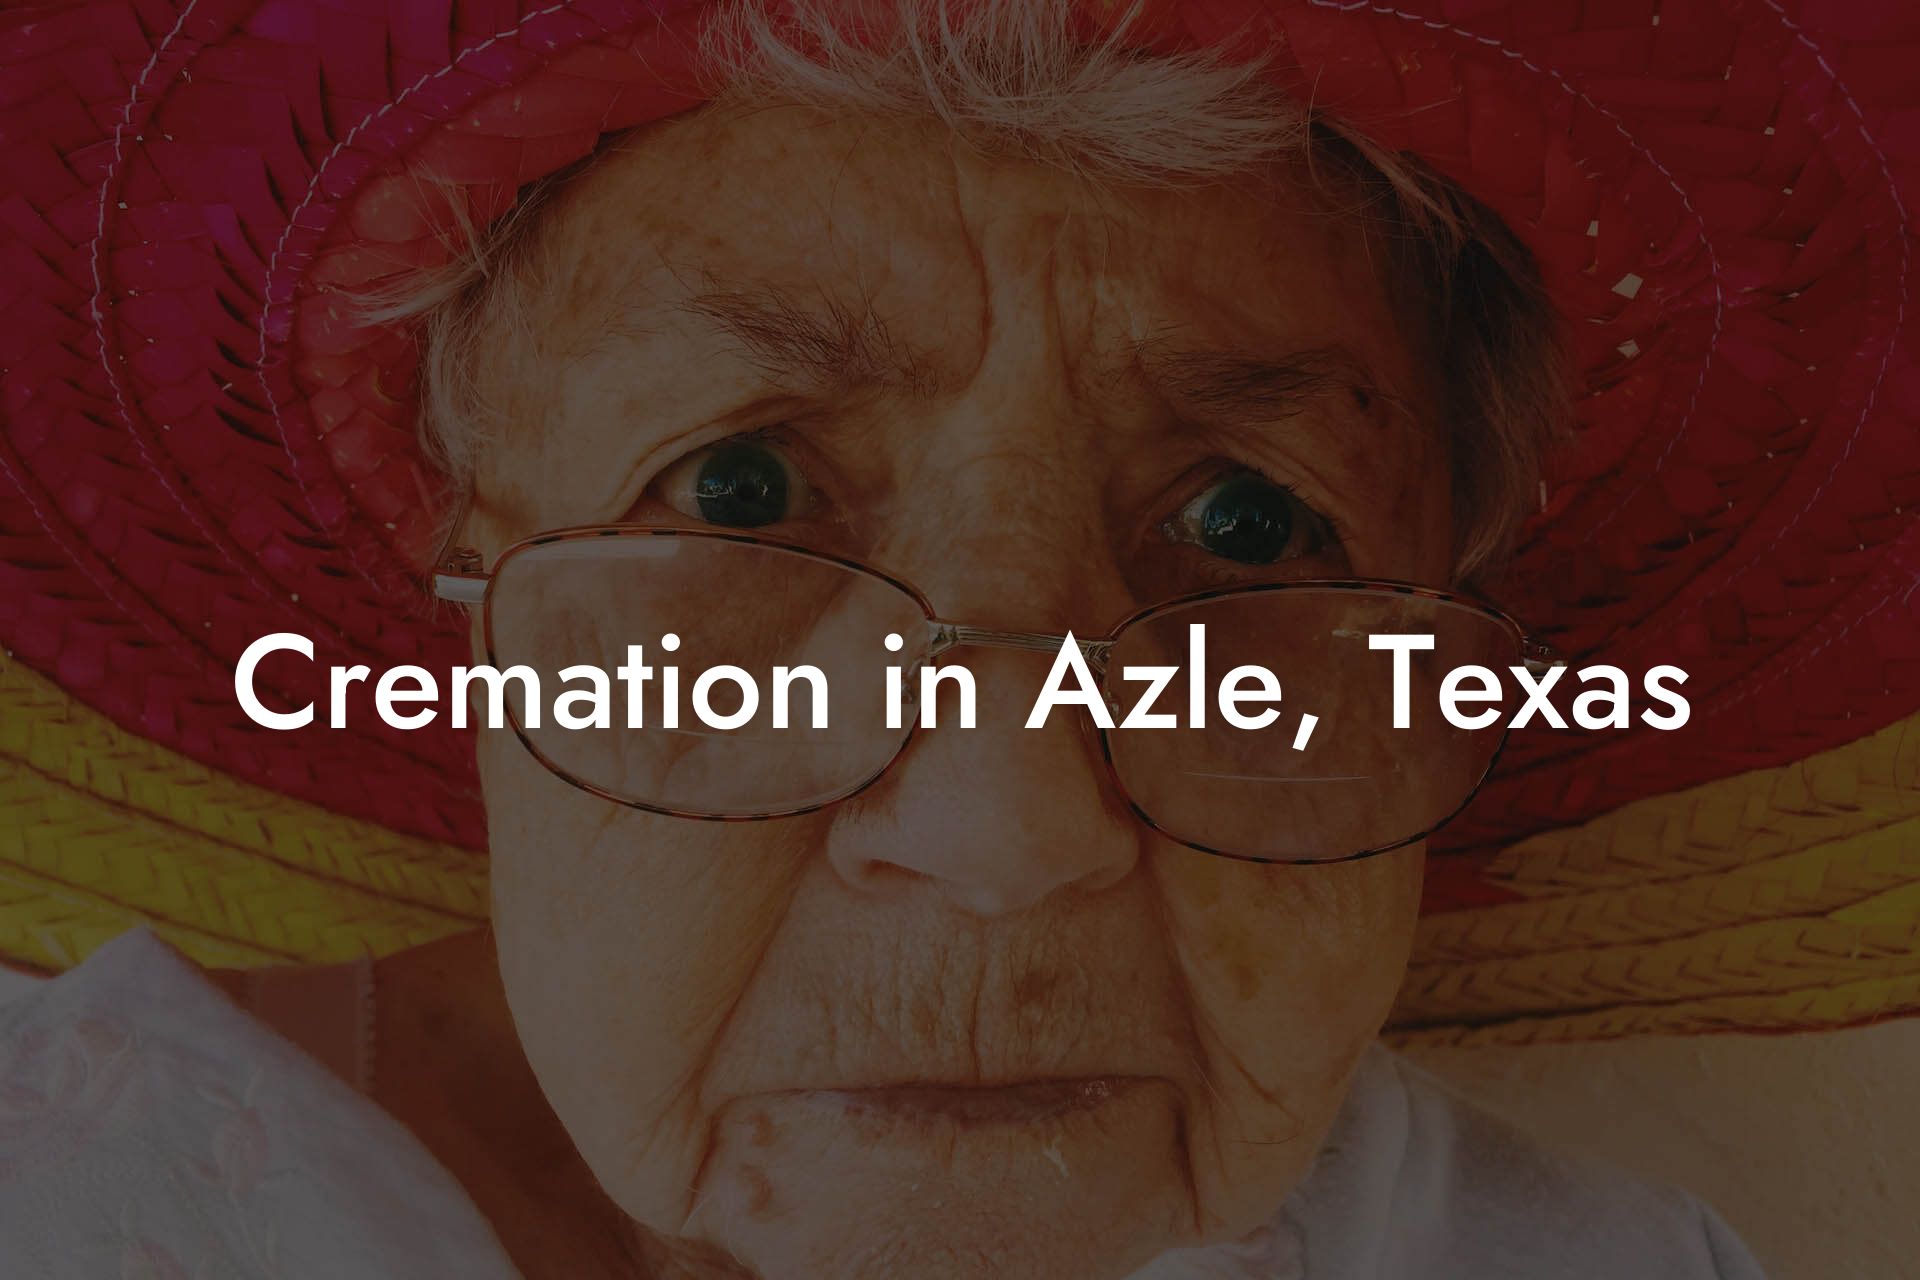 Cremation in Azle, Texas